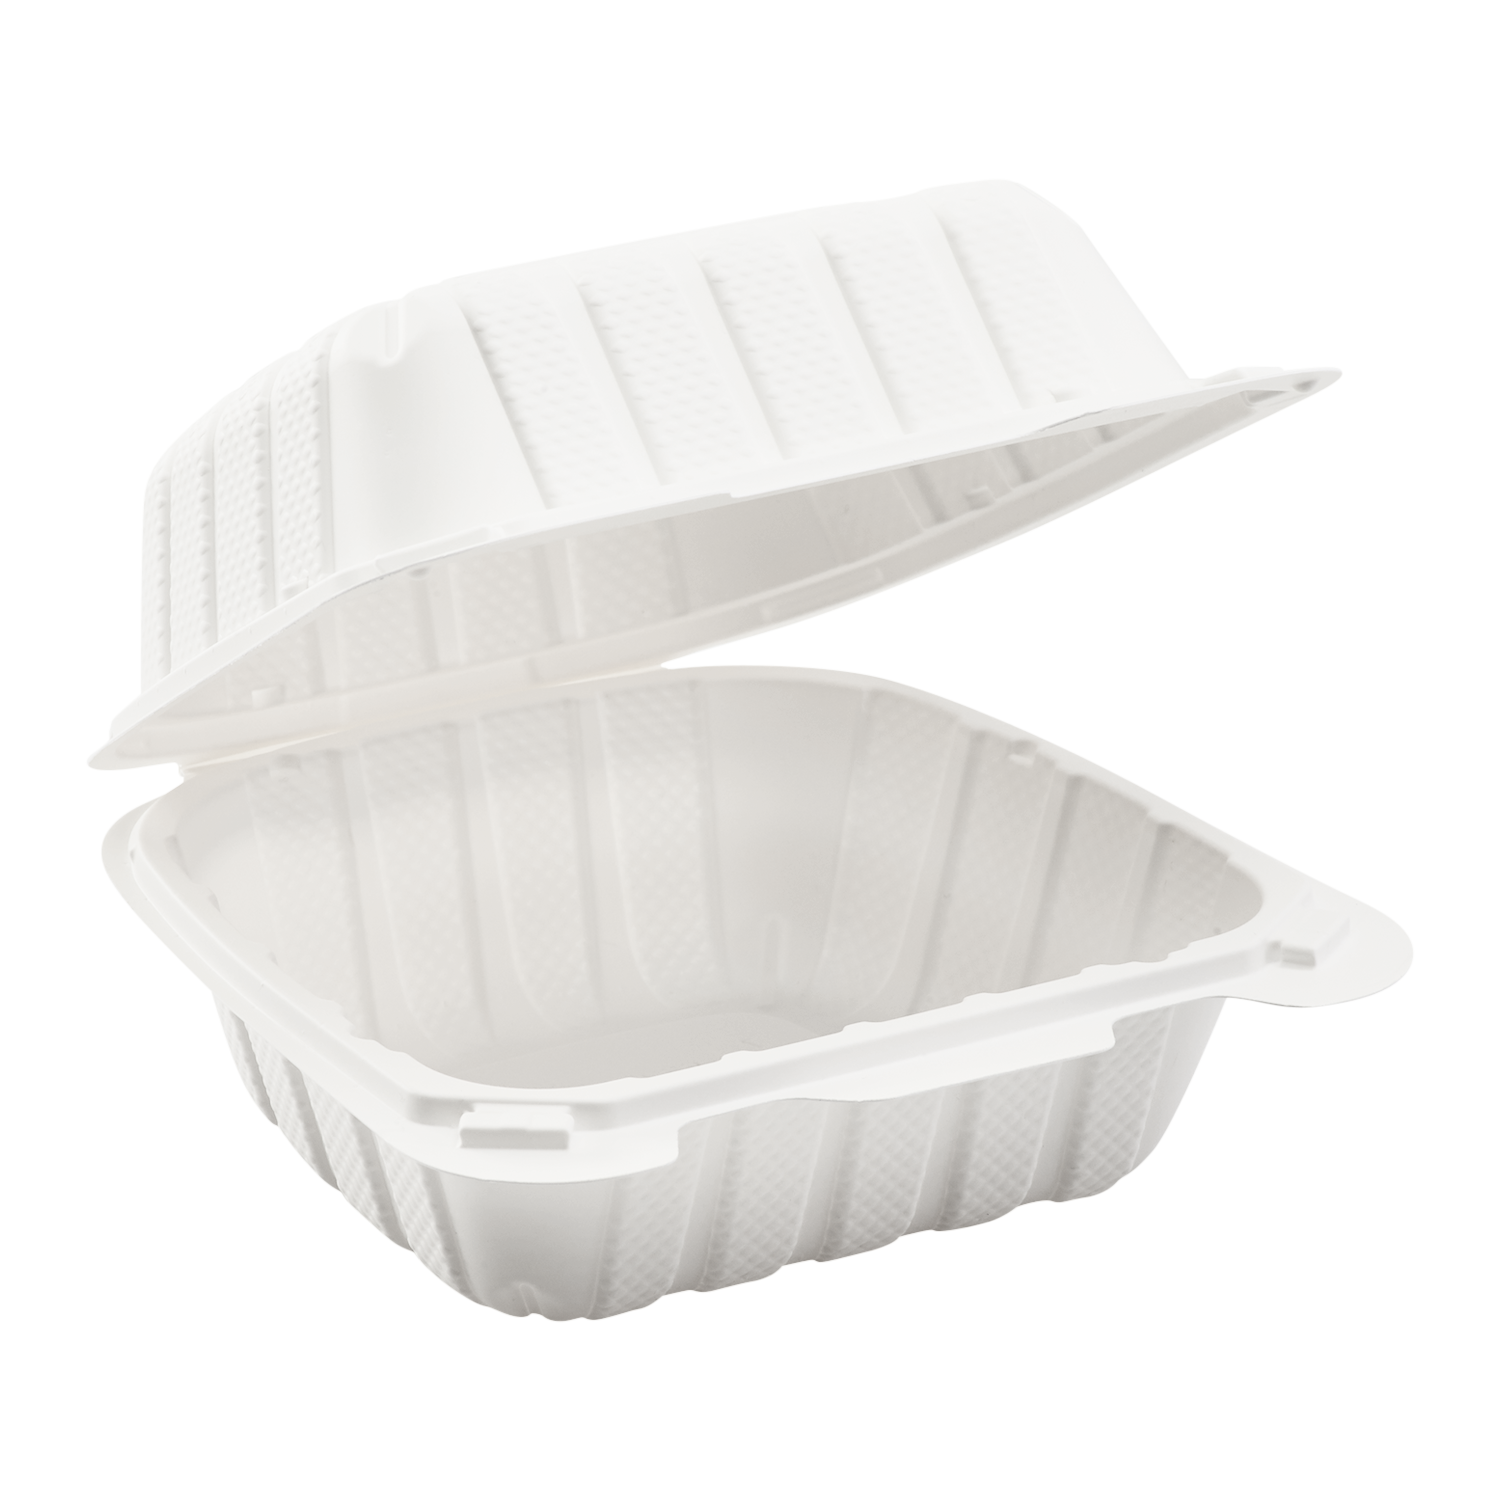 Wholesale Clear Takeout Containers, The Box Depot